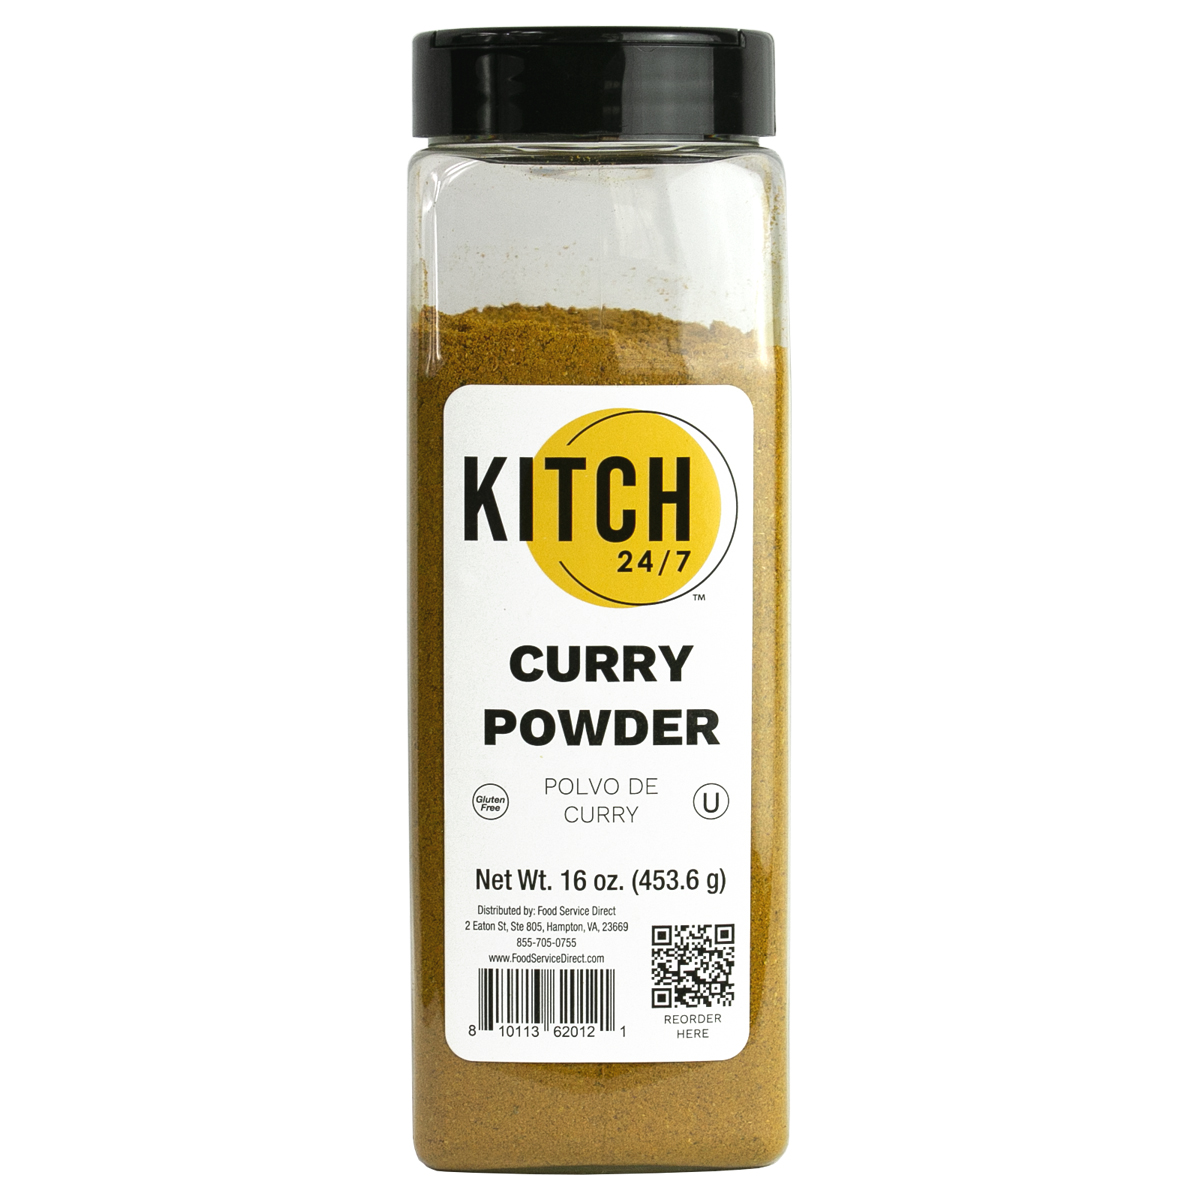 KITCH 24/7 Curry Powder, 16 Ounce